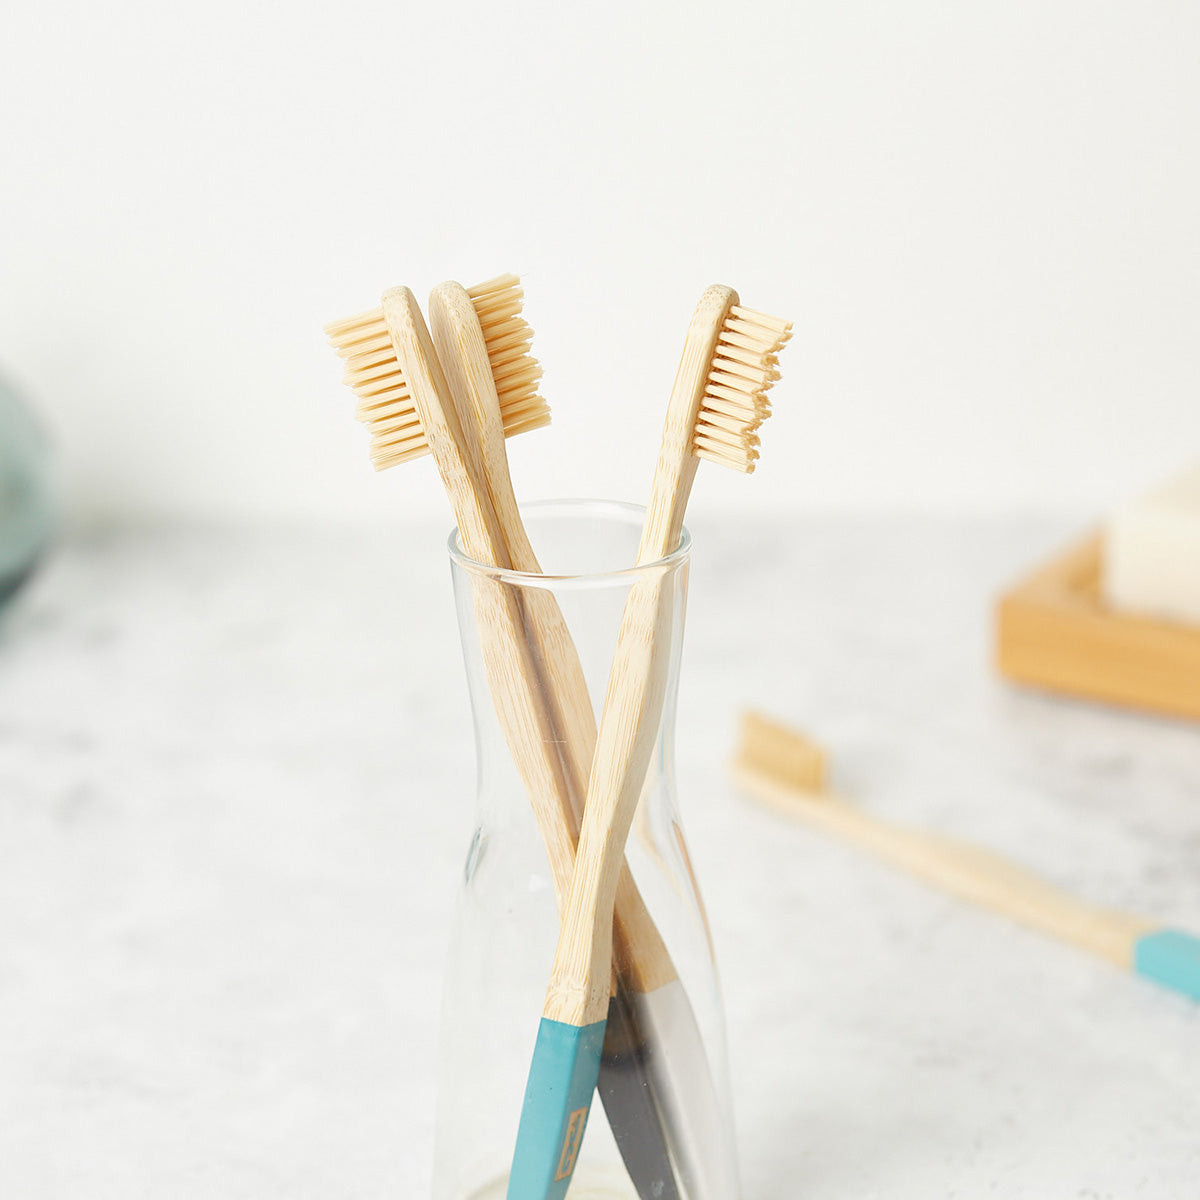 Family pack of bamboo toothbrushes